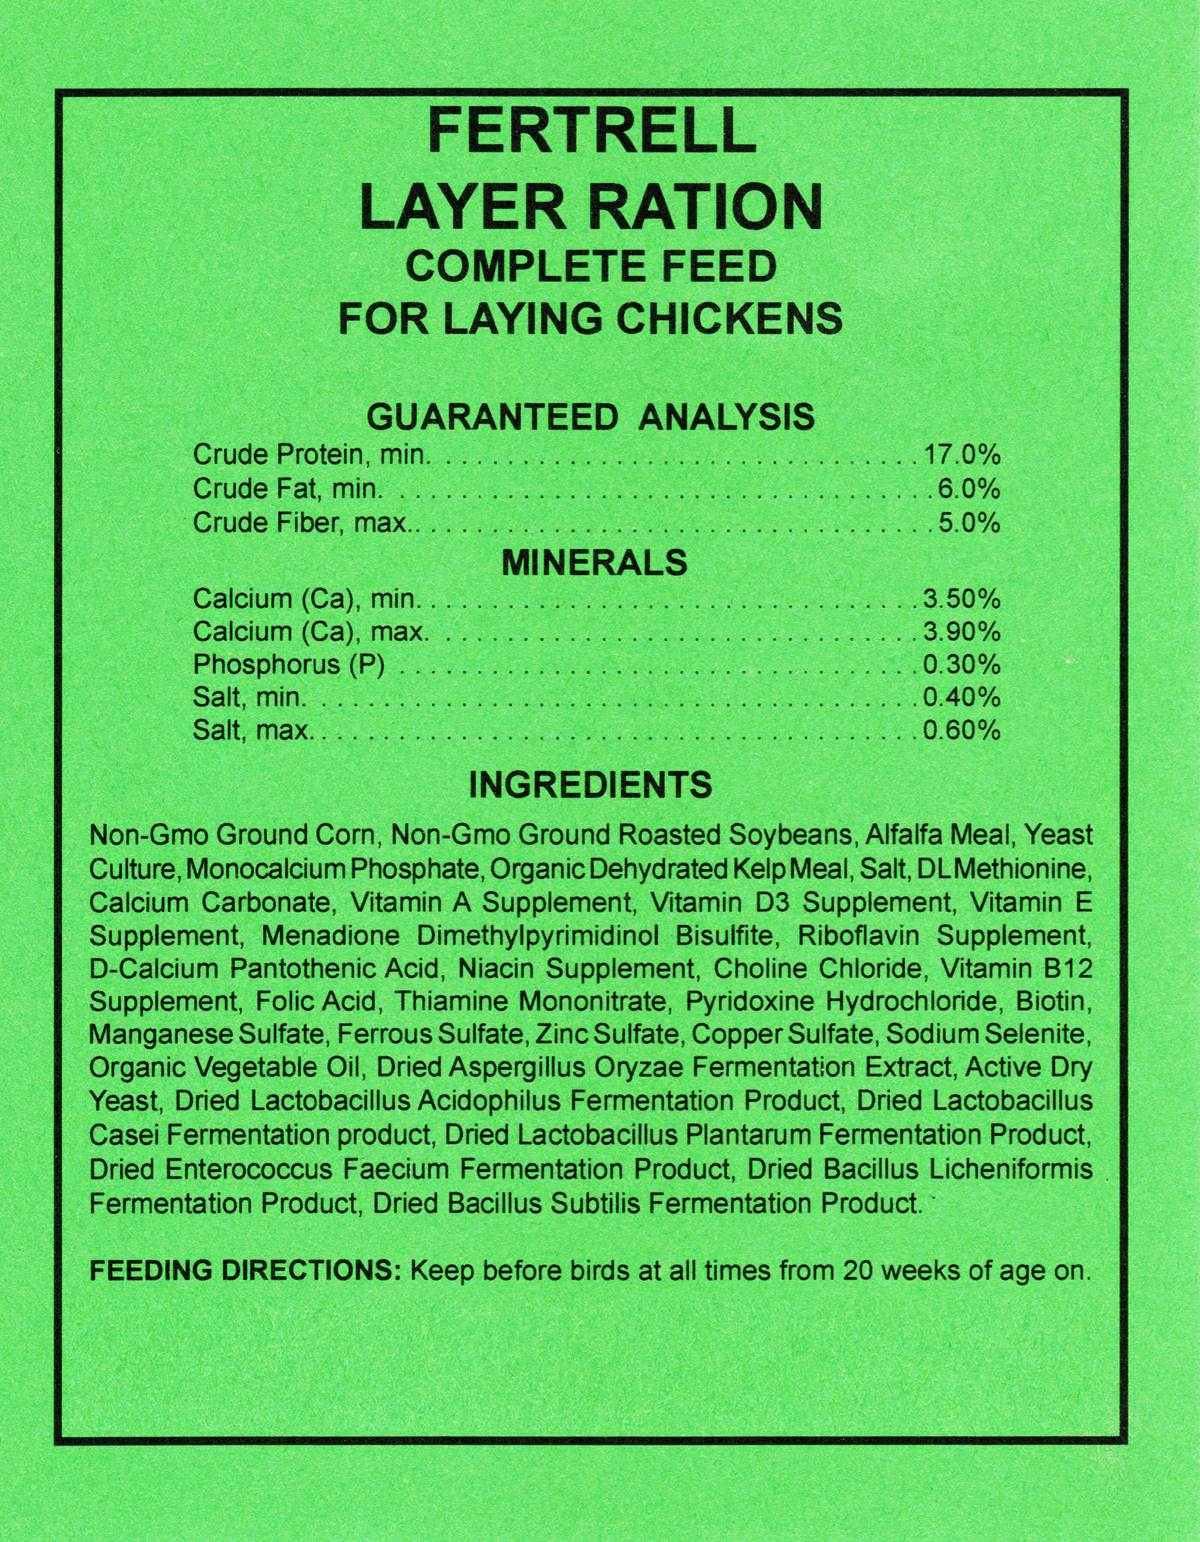 feed label layer